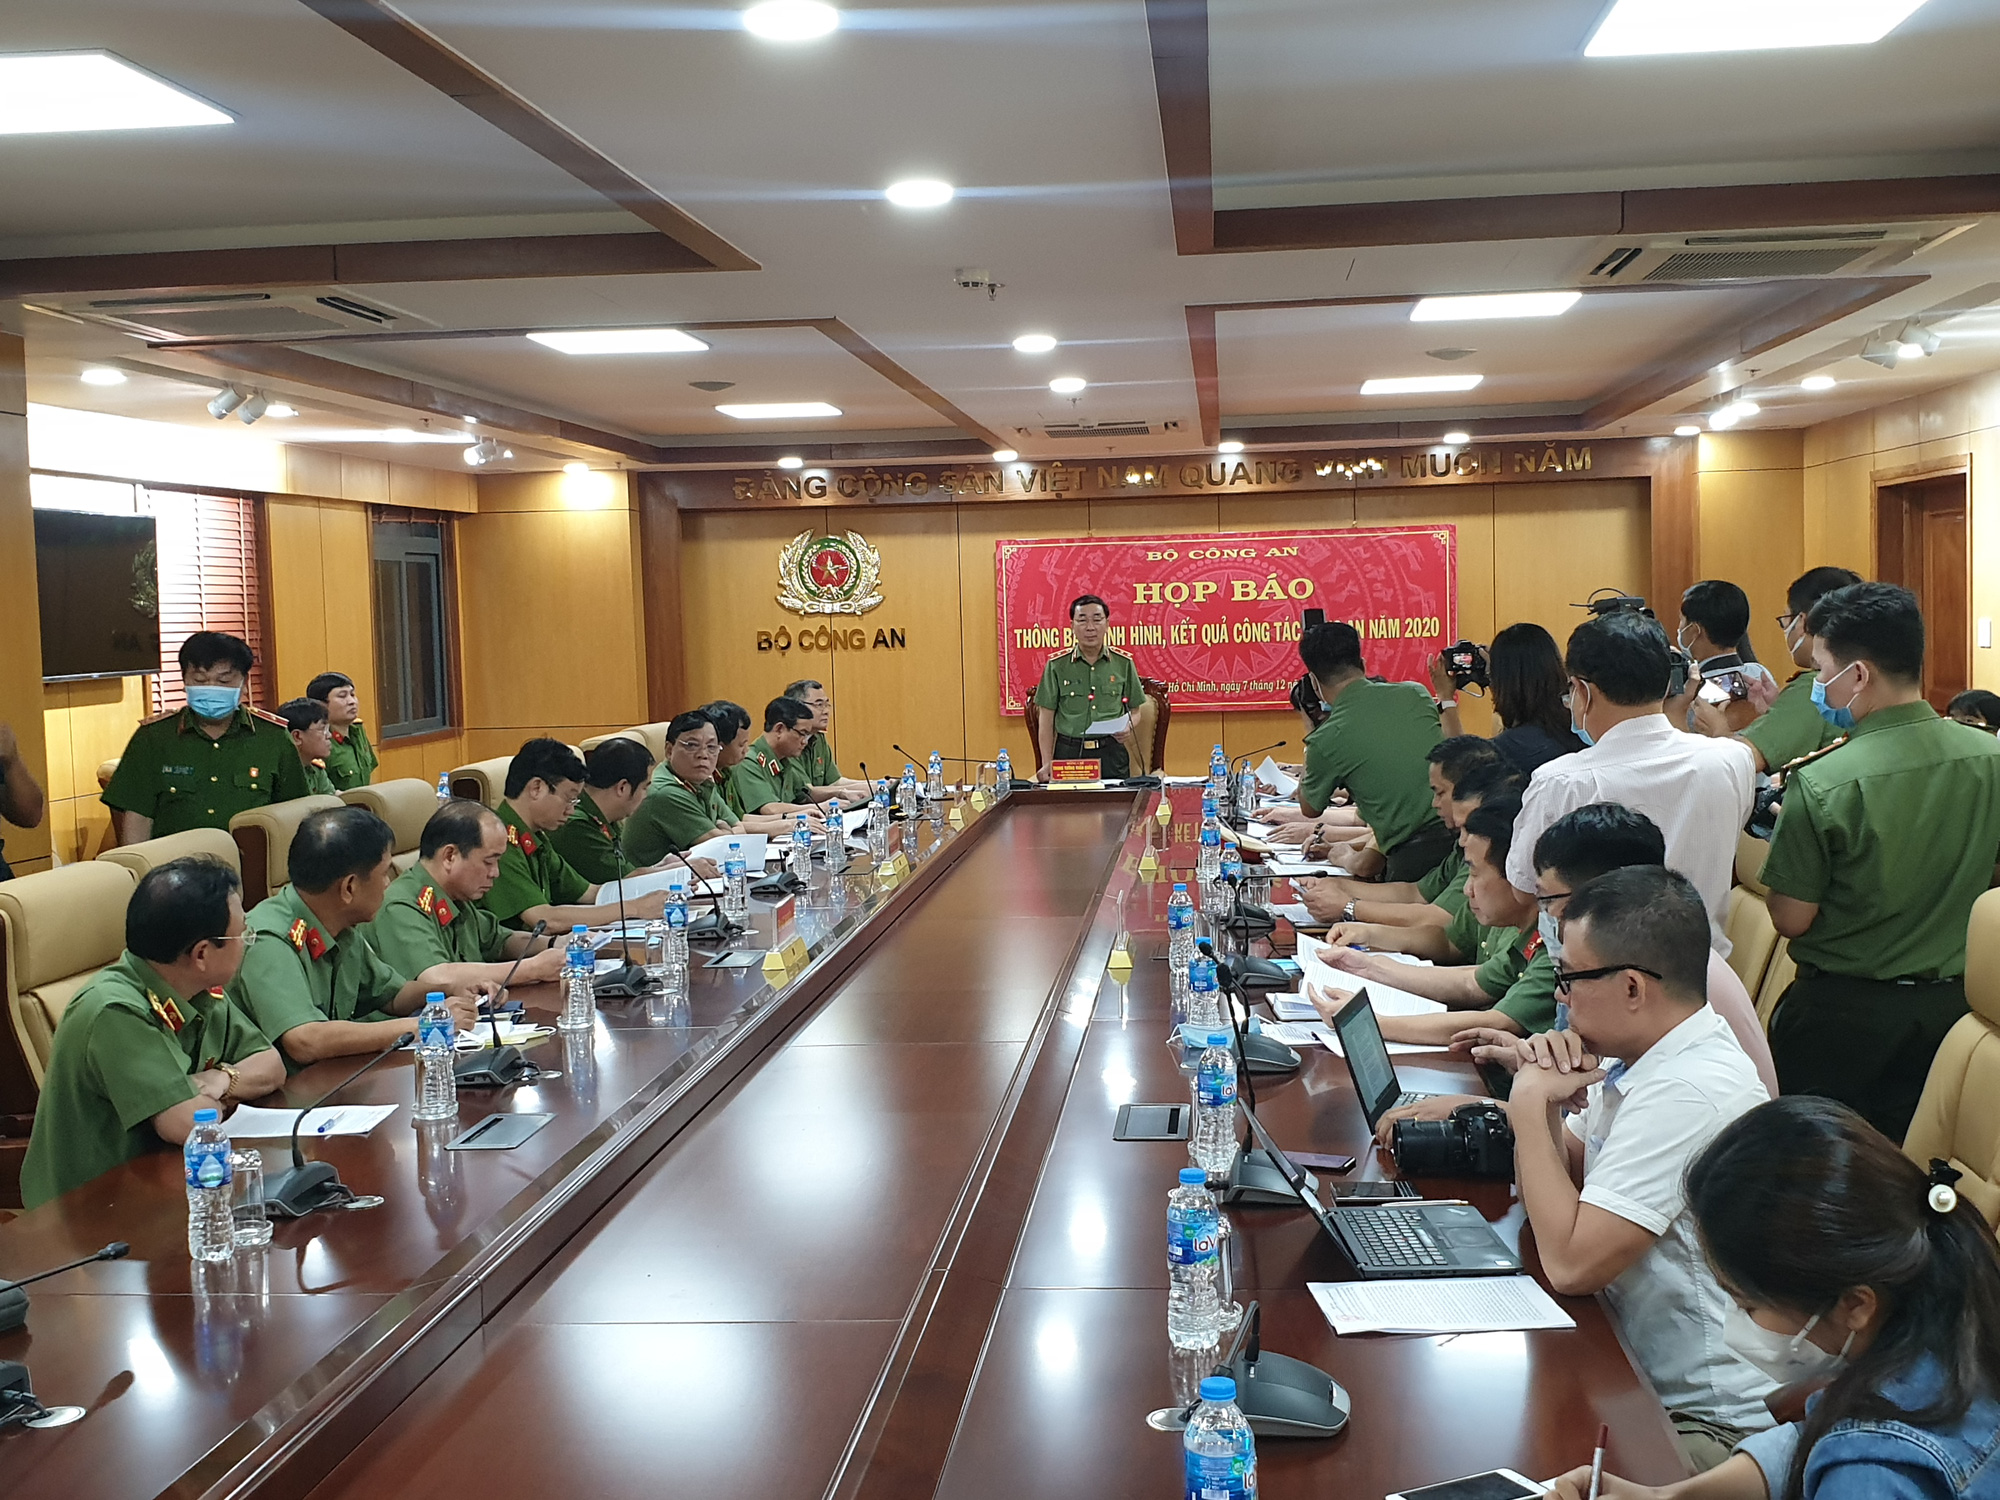 8 officers arrested for taking bribes, freeing drug dealers in Ho Chi Minh City